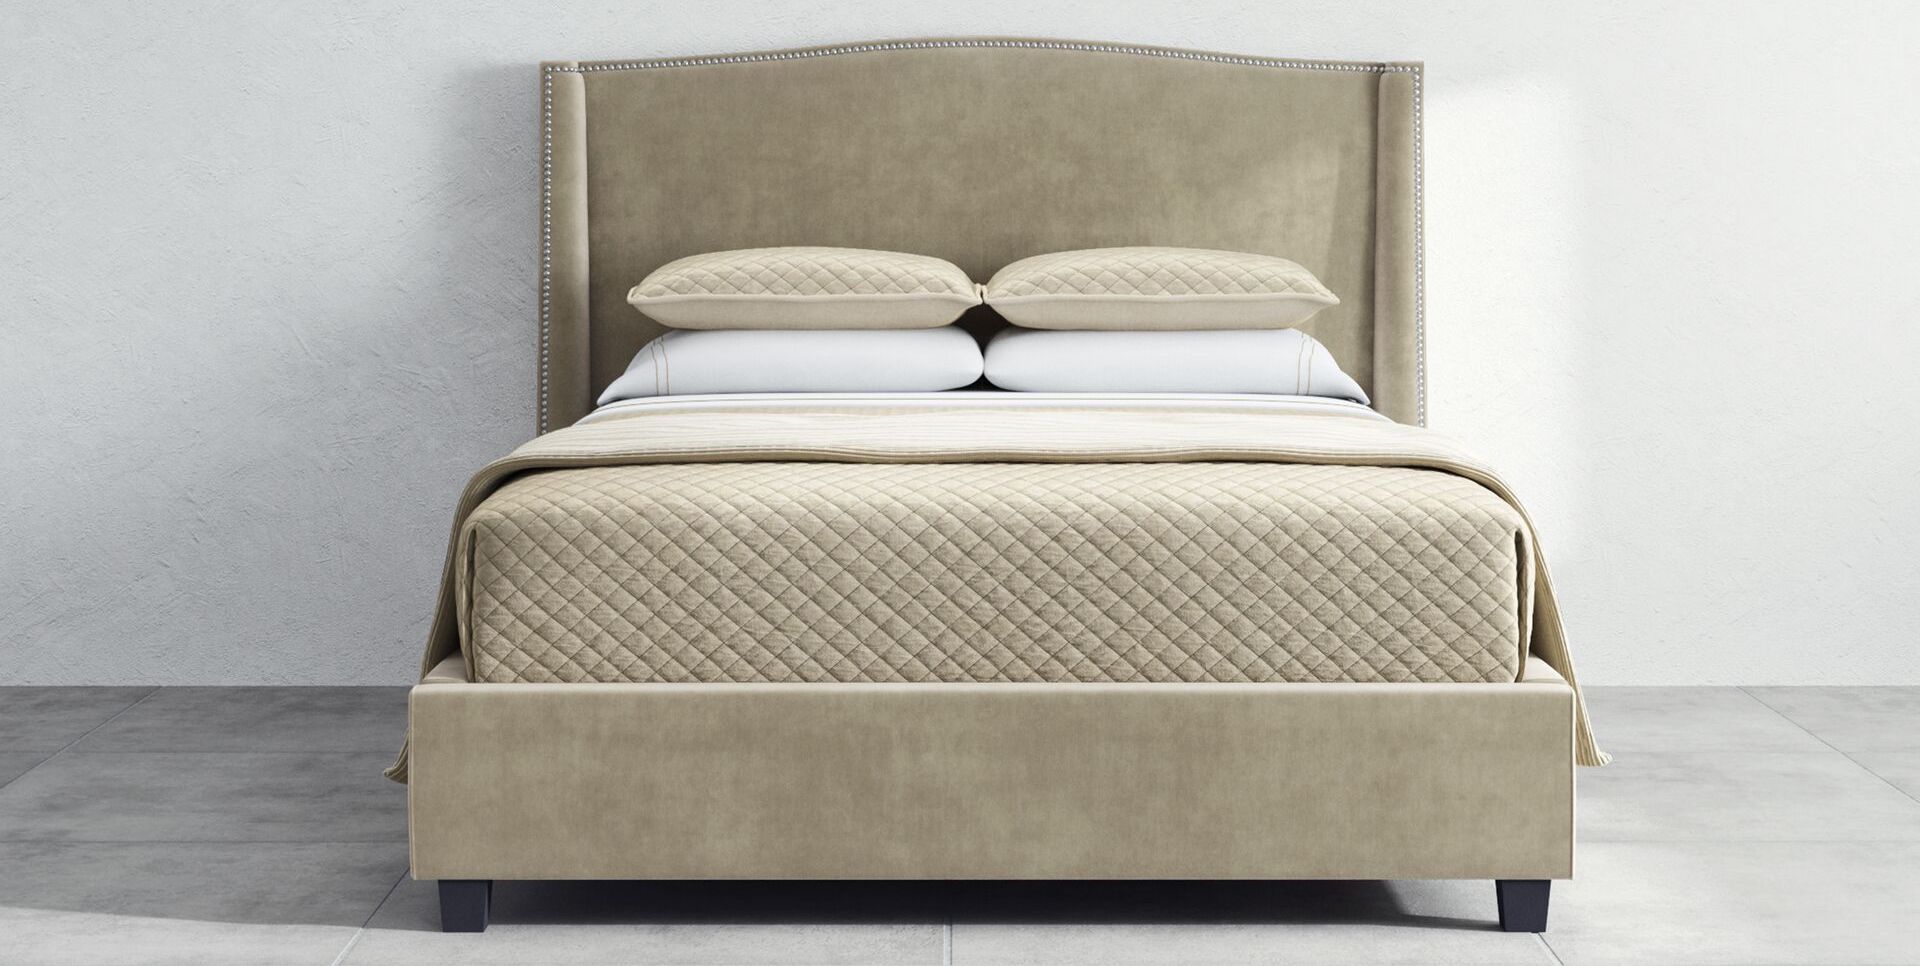 How to Choose a Bed Frame: Styles, Materials, and Other Considerations